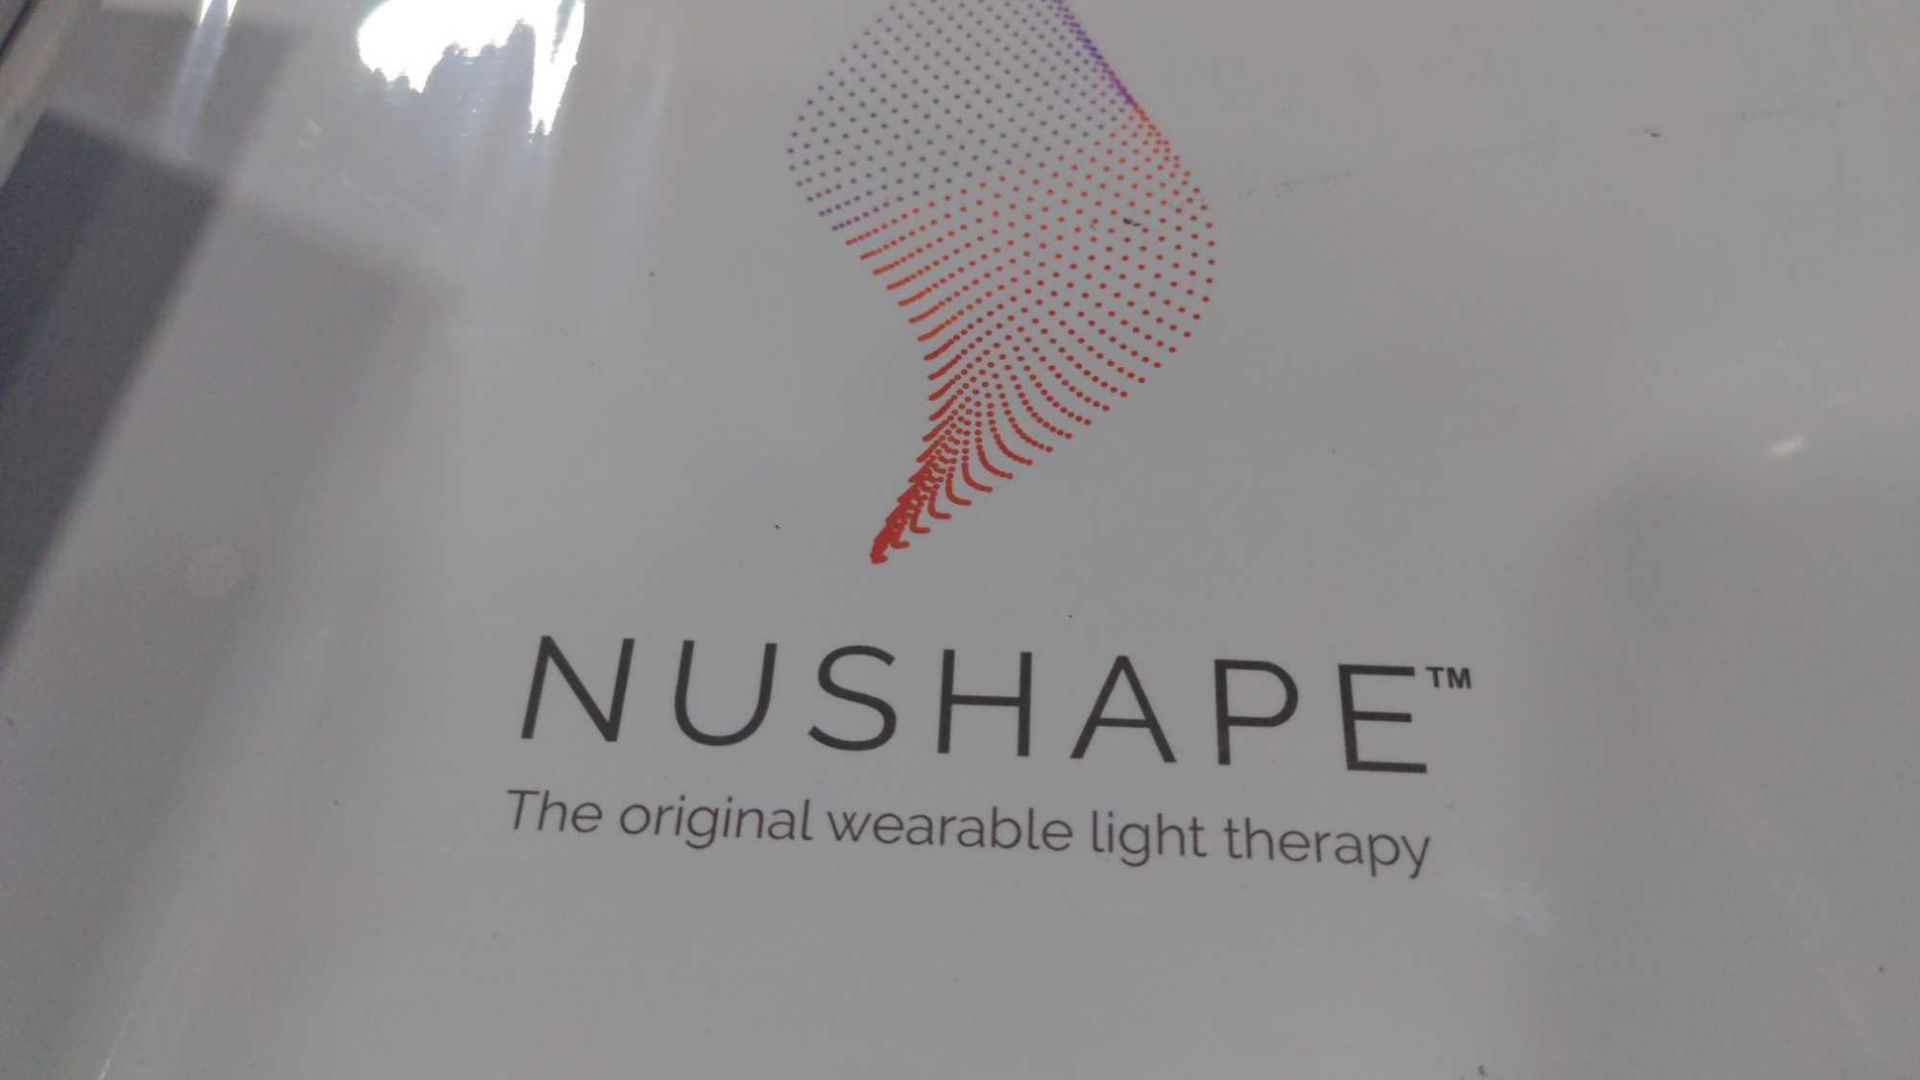 Nushape light therapy kits and more - Image 4 of 13